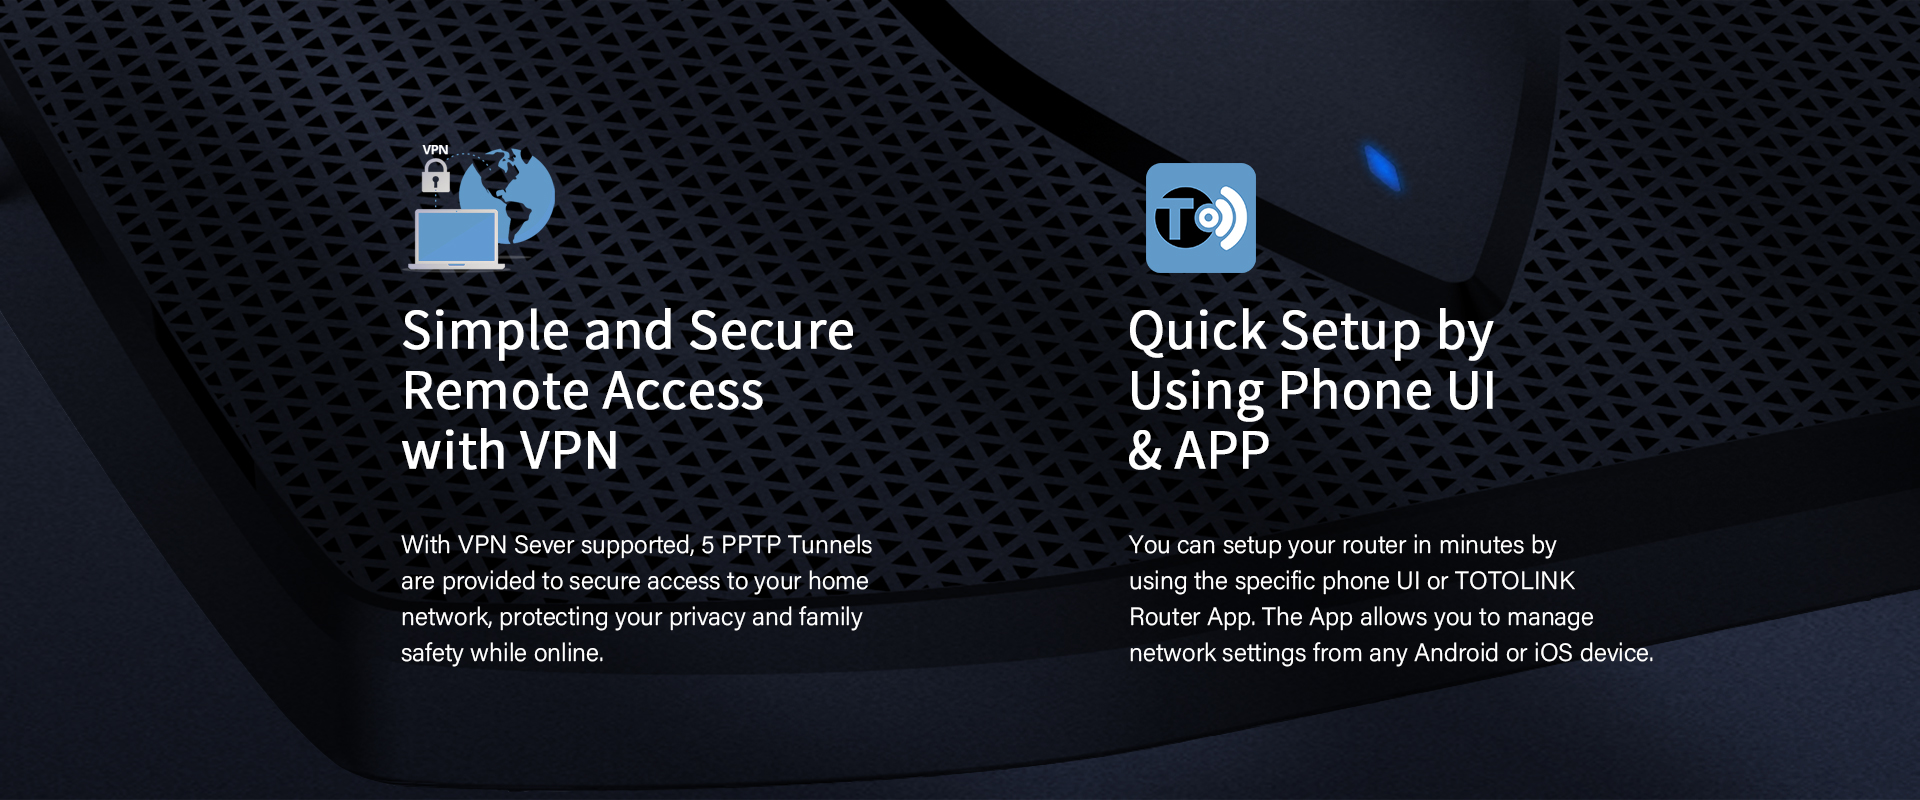 remote access with VPN